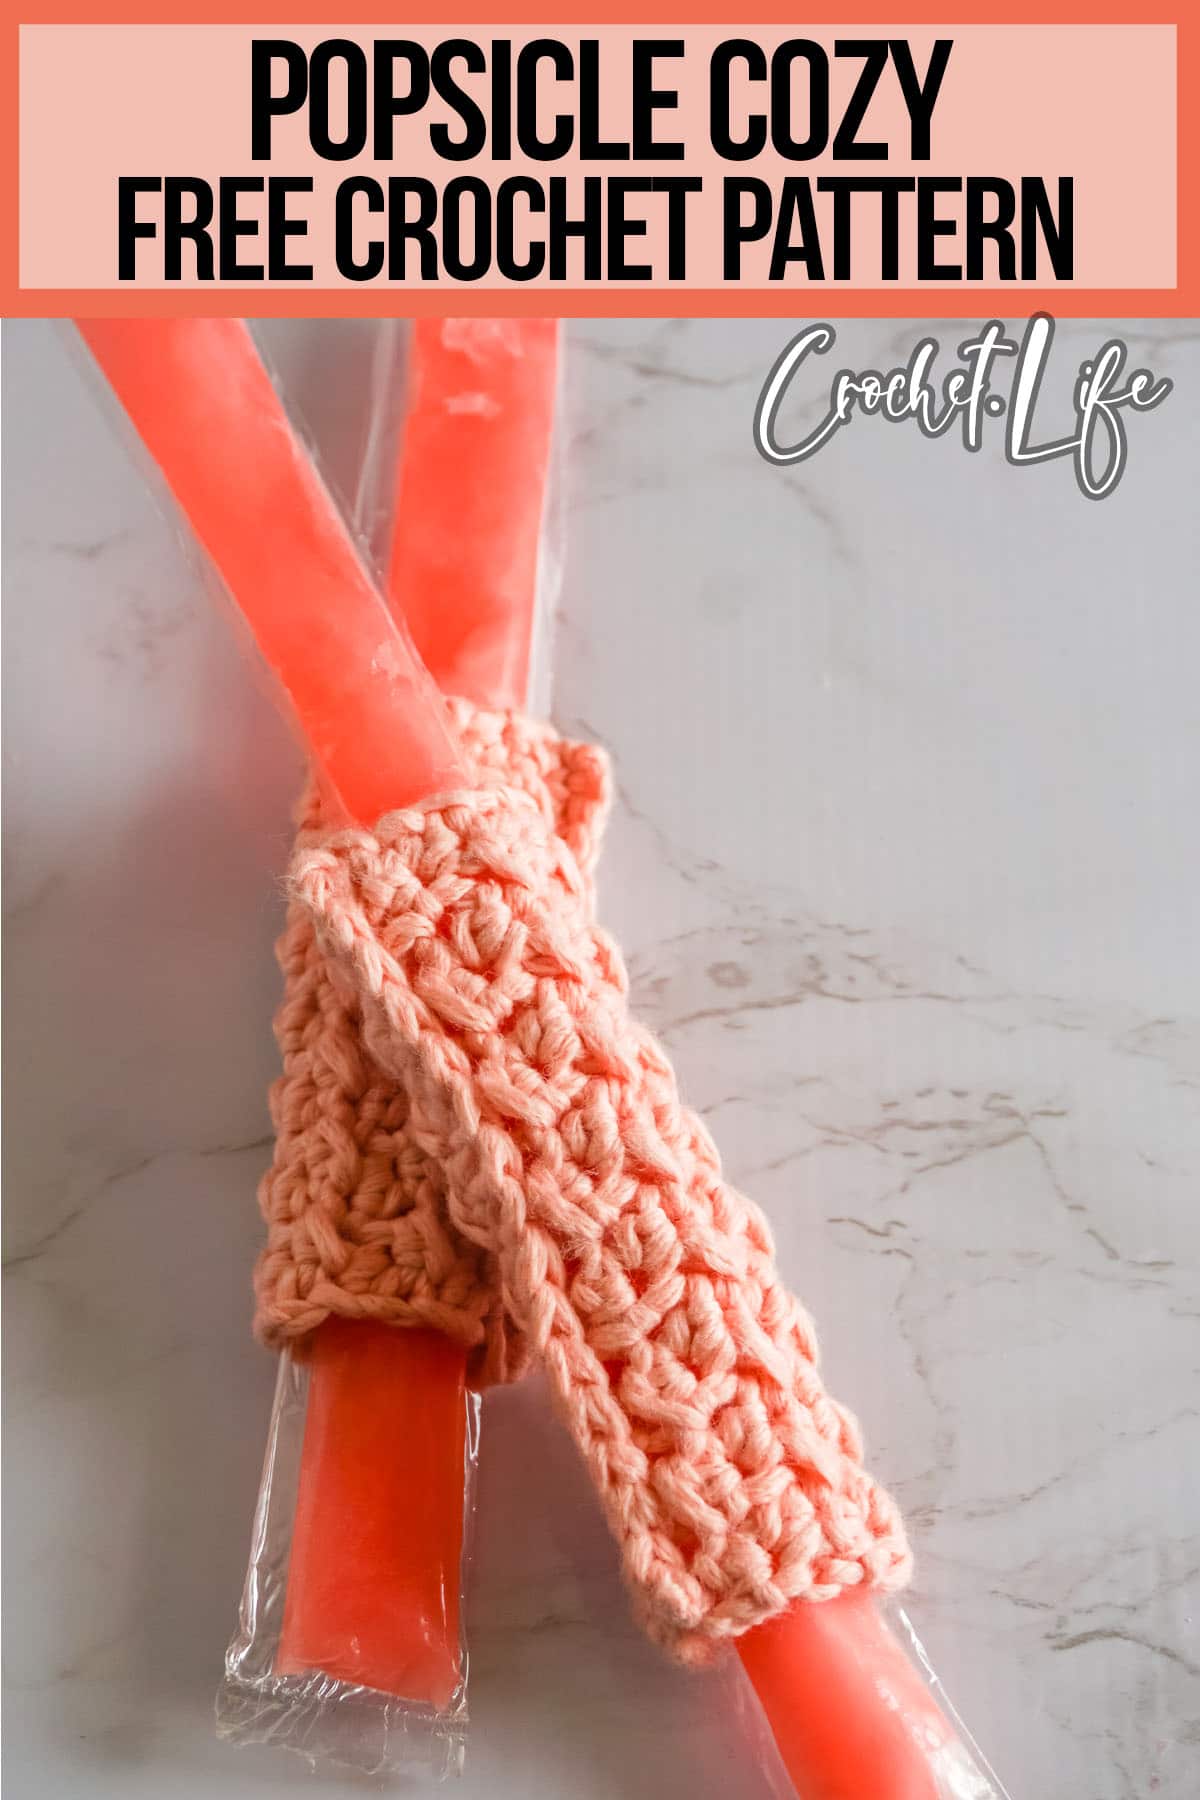 free ice pop cuff crochet pattern with text which reads popsicle cozy free crochet pattern